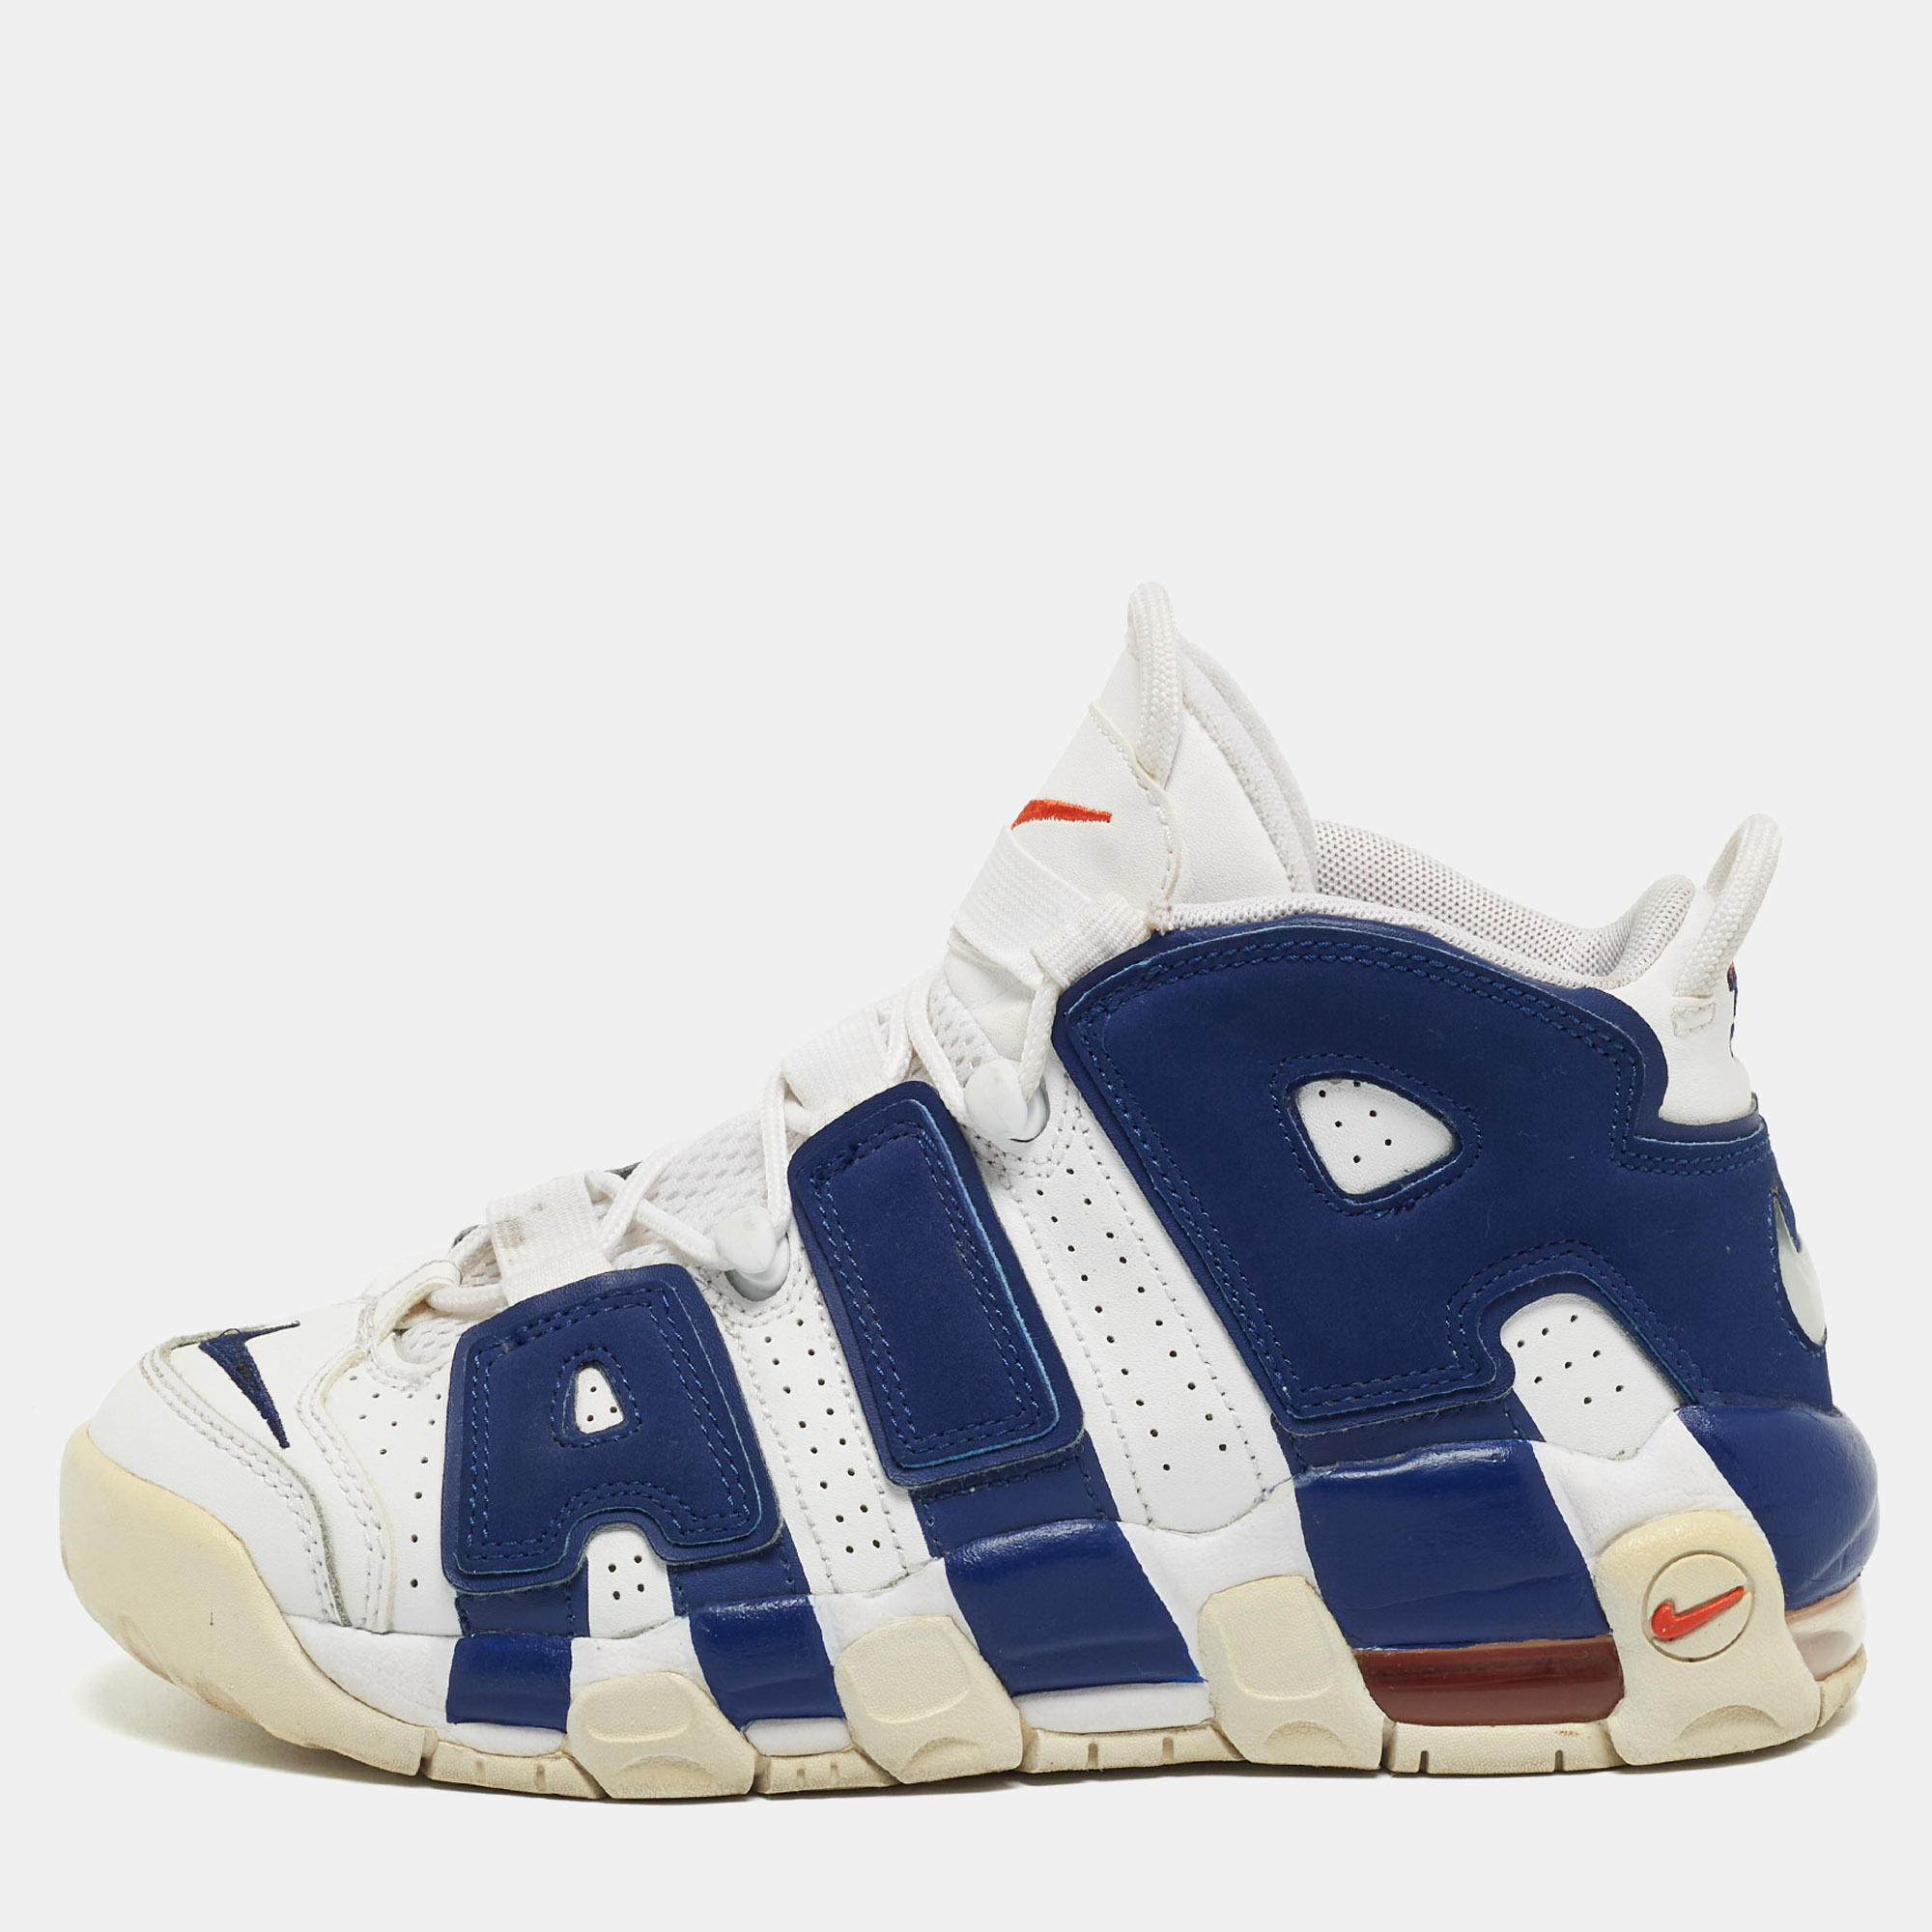 Pre-owned Nike Air White/blue Leather More Uptempo Knicks Trainers Size 38